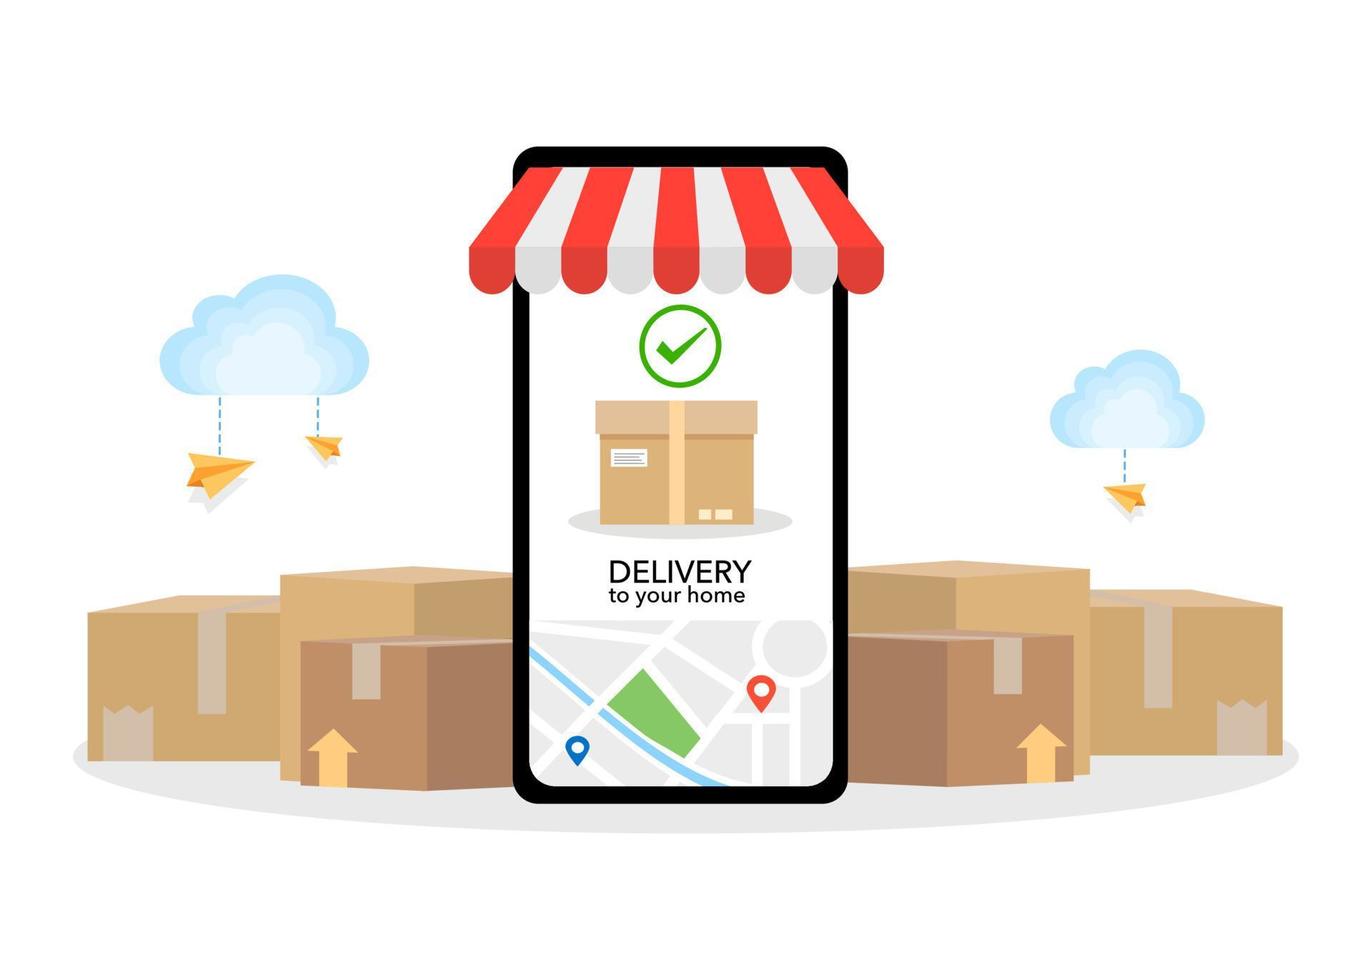 Online delivery app for parcel, package. Fast shipping service on mobile. Order tracking with map on phone screen. Ship around the world to home. Delivered success. Flat vector illustration.